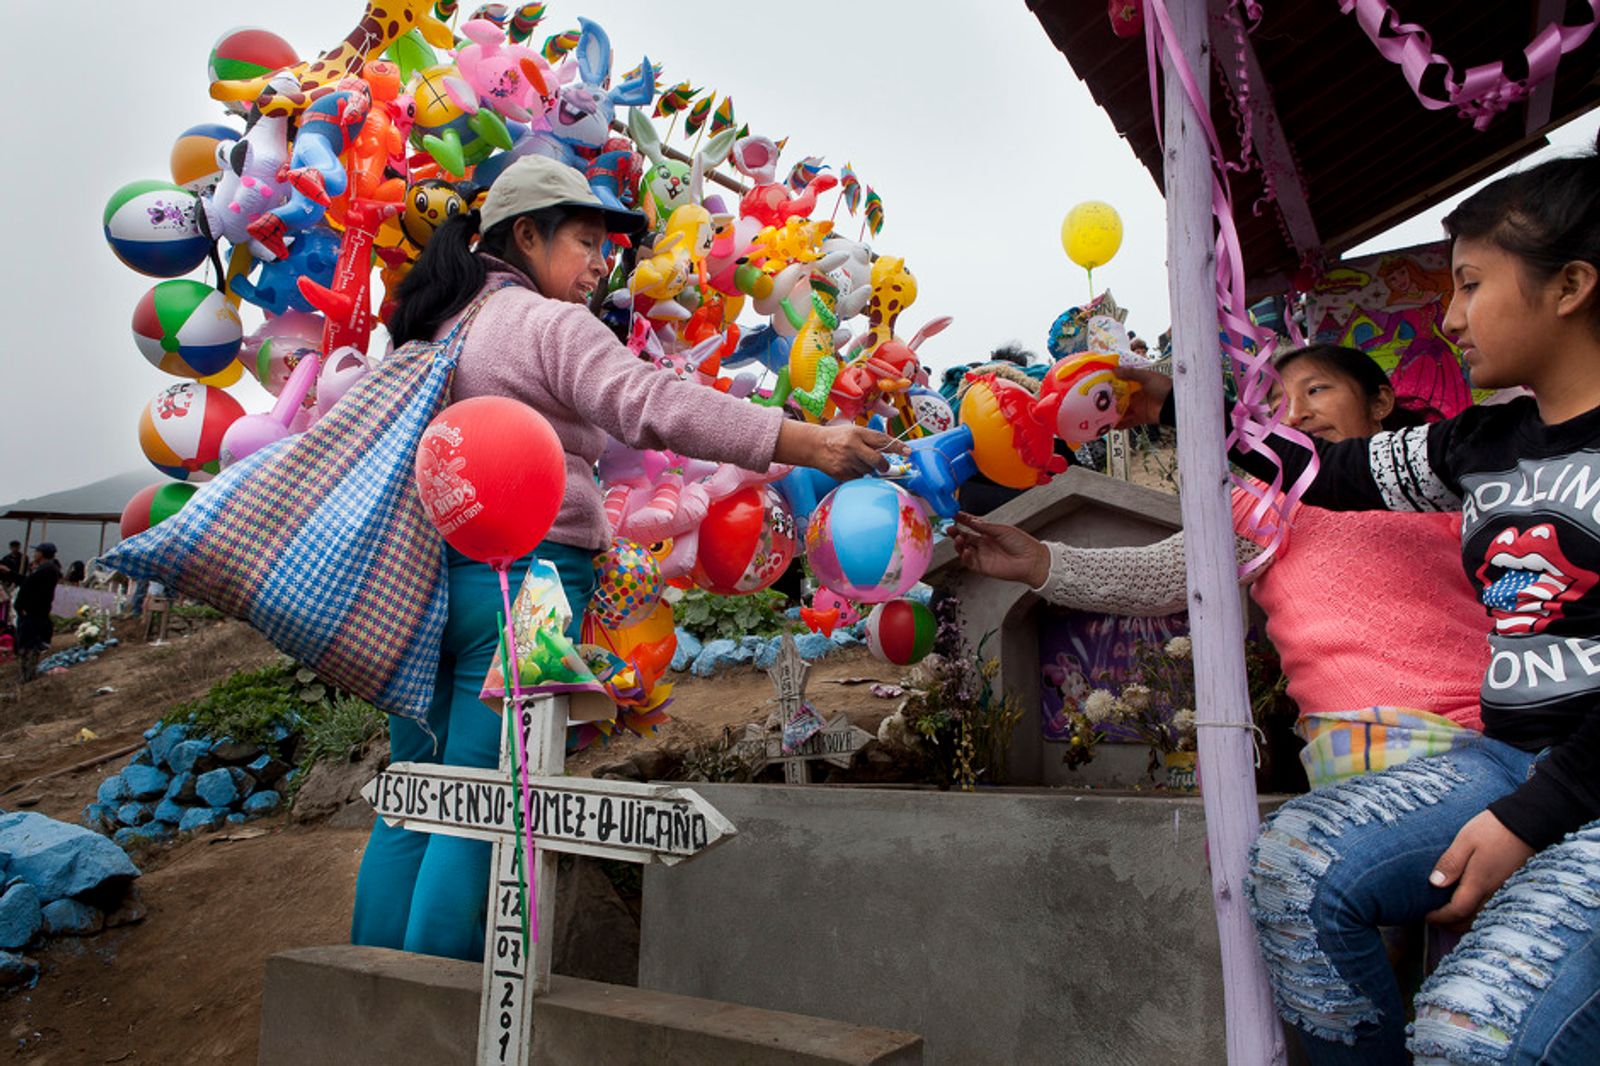 © Guillermo Gutierrez - Women selling plastic toys for kids around the cemetery.